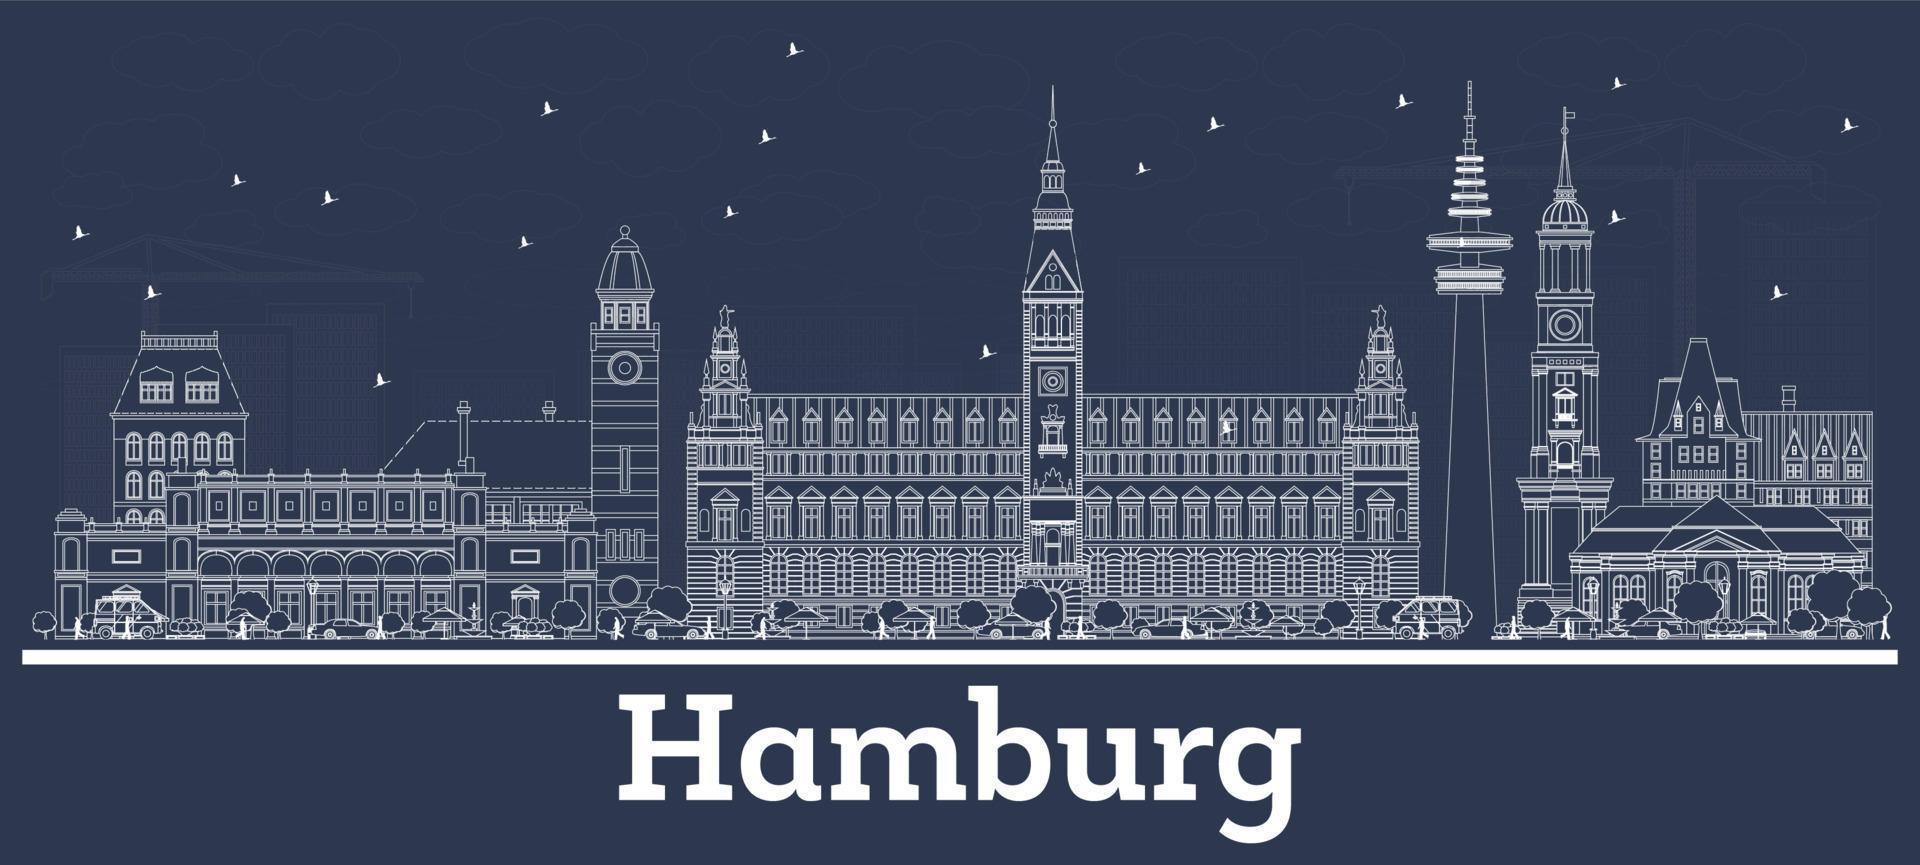 Outline Hamburg Germany City Skyline with White Buildings. vector